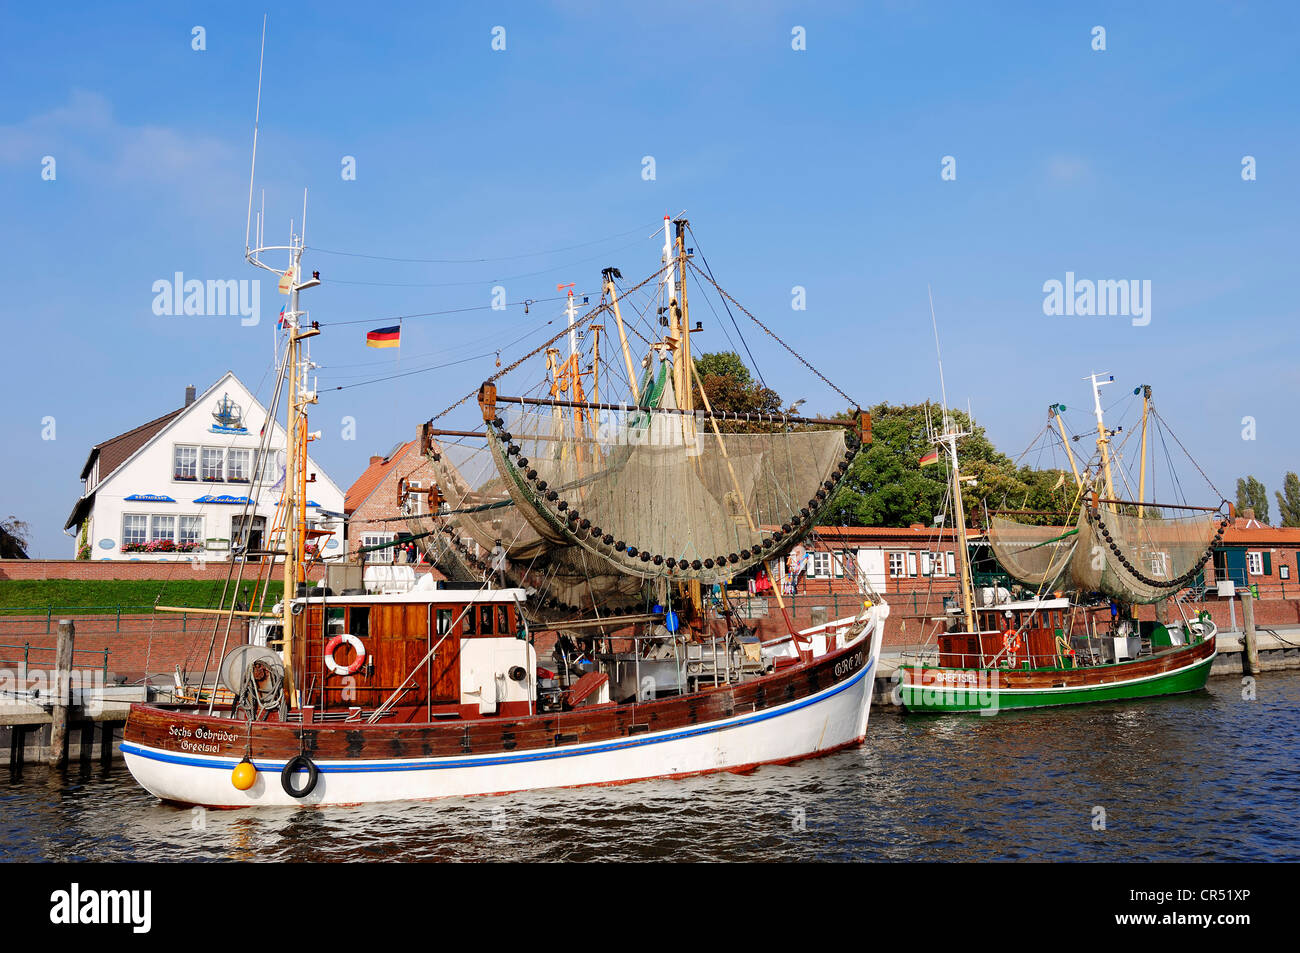 Shrimp cutters in the harbour, Greetsiel, East Frisia, Lower Saxony, Germany, Europe Stock Photo